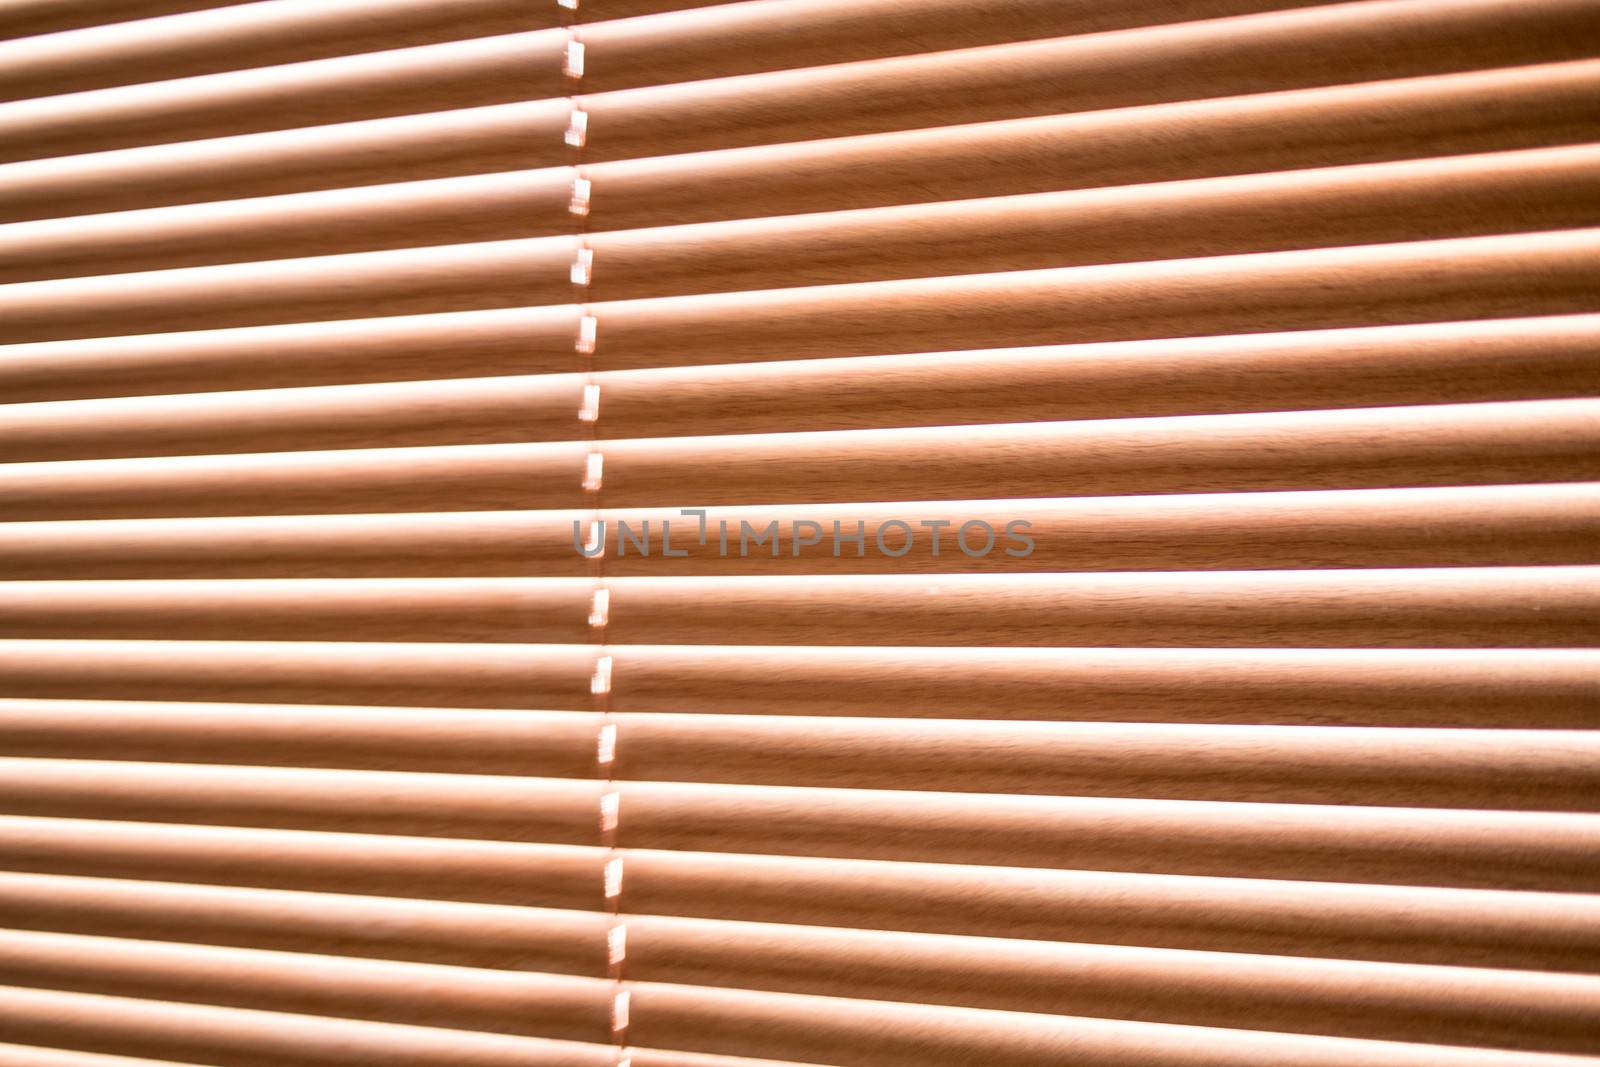 Jalousie wood blinds by stockyimages